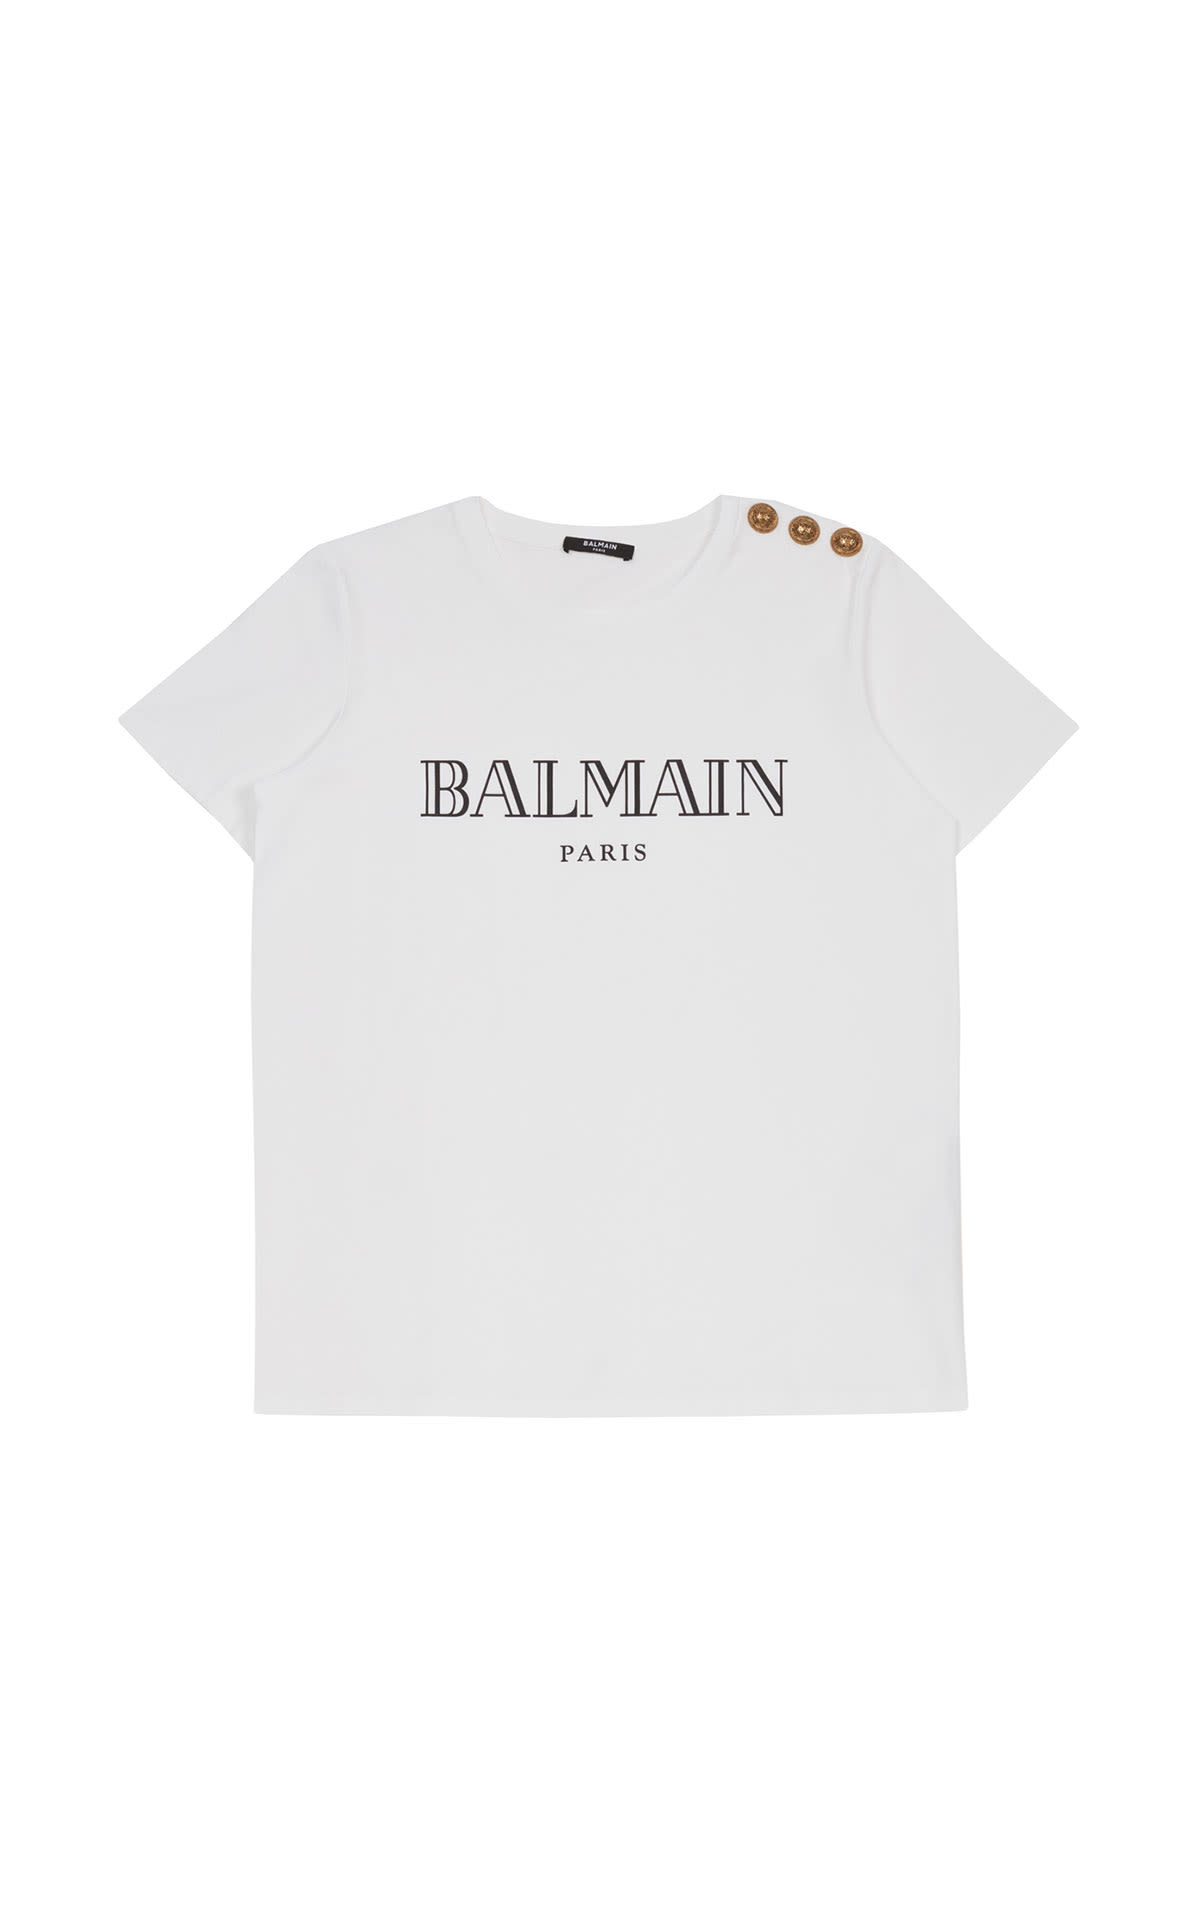 Balmain Outlet Store Near London Sale Now On Bicester Village